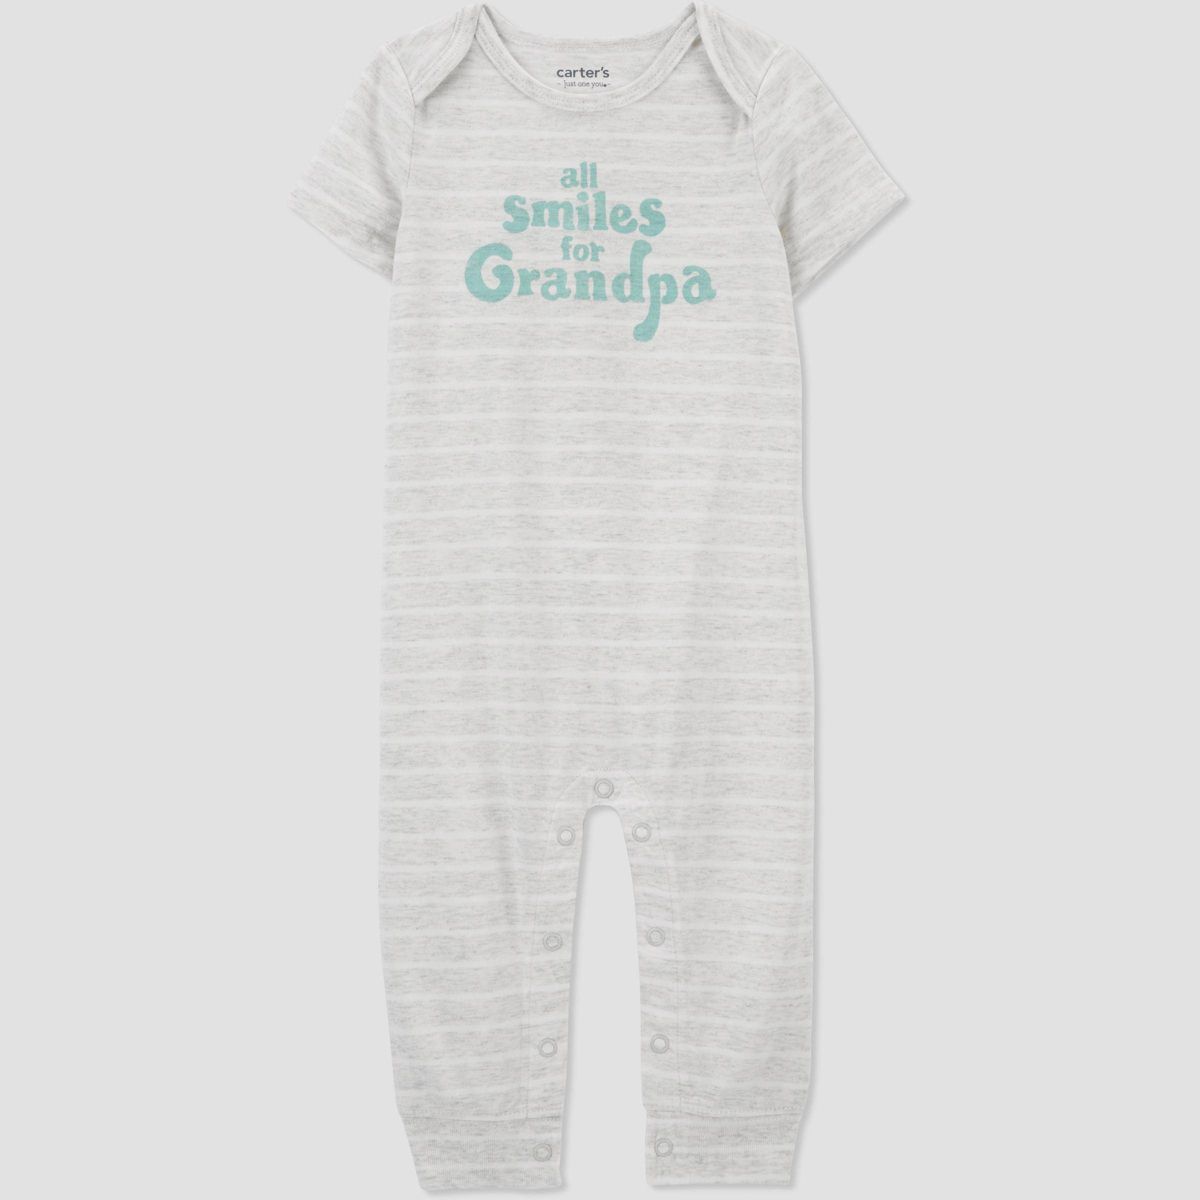 Carter's Just One You®️ Baby Family Love Grandpa Romper - Blue/Gray | Target